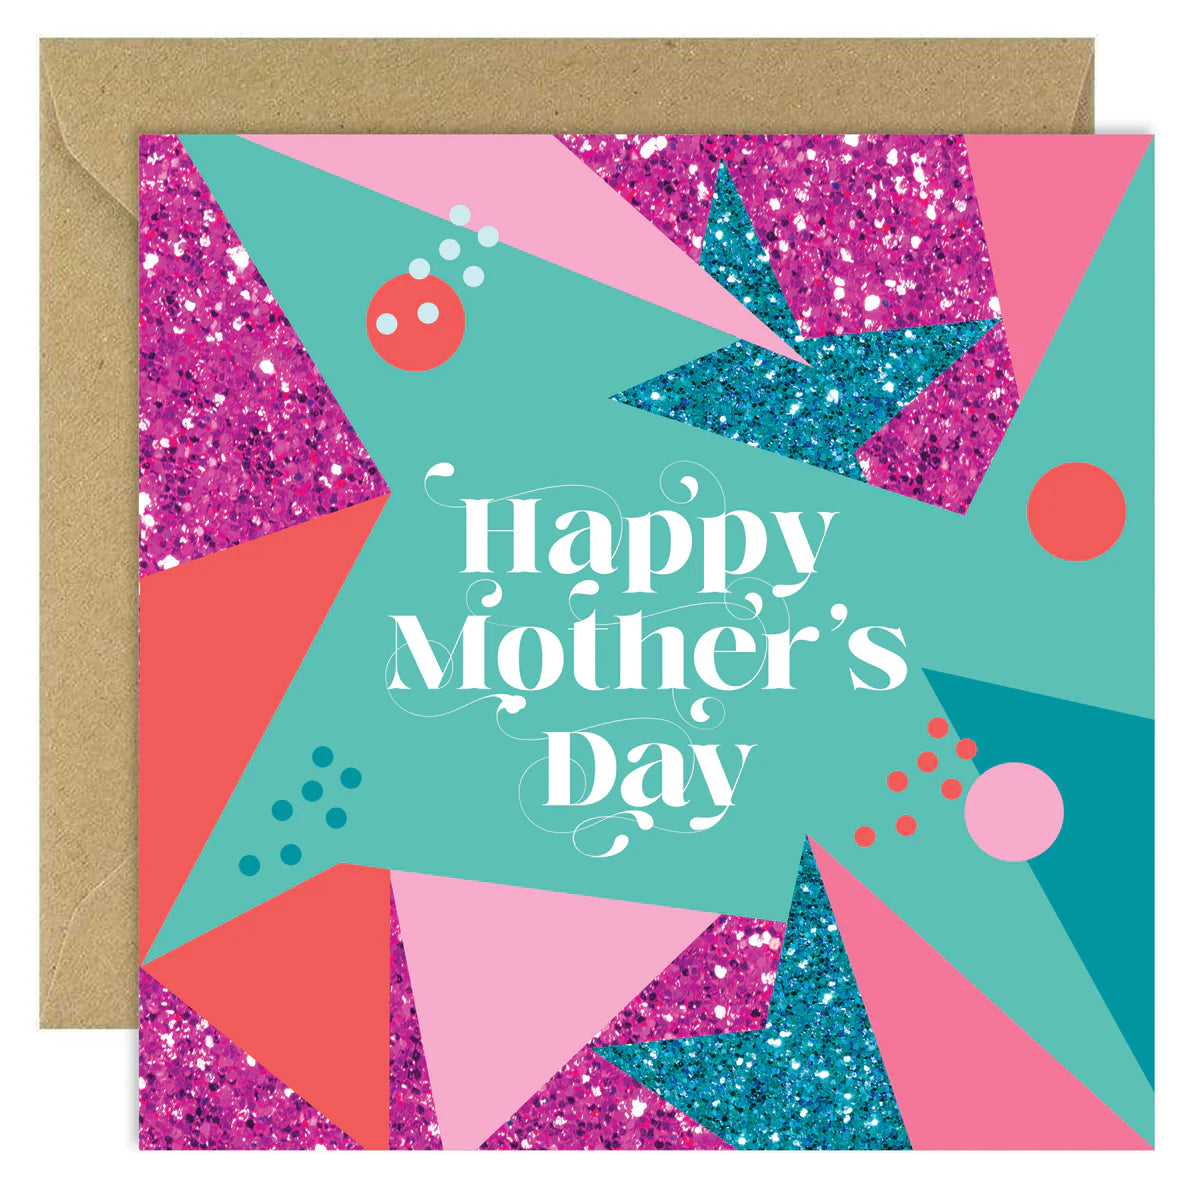 Fabulous Irish Made Greeting Cards Bold Bunny Happy Mothers Day Geo by Weirs of Baggot Street